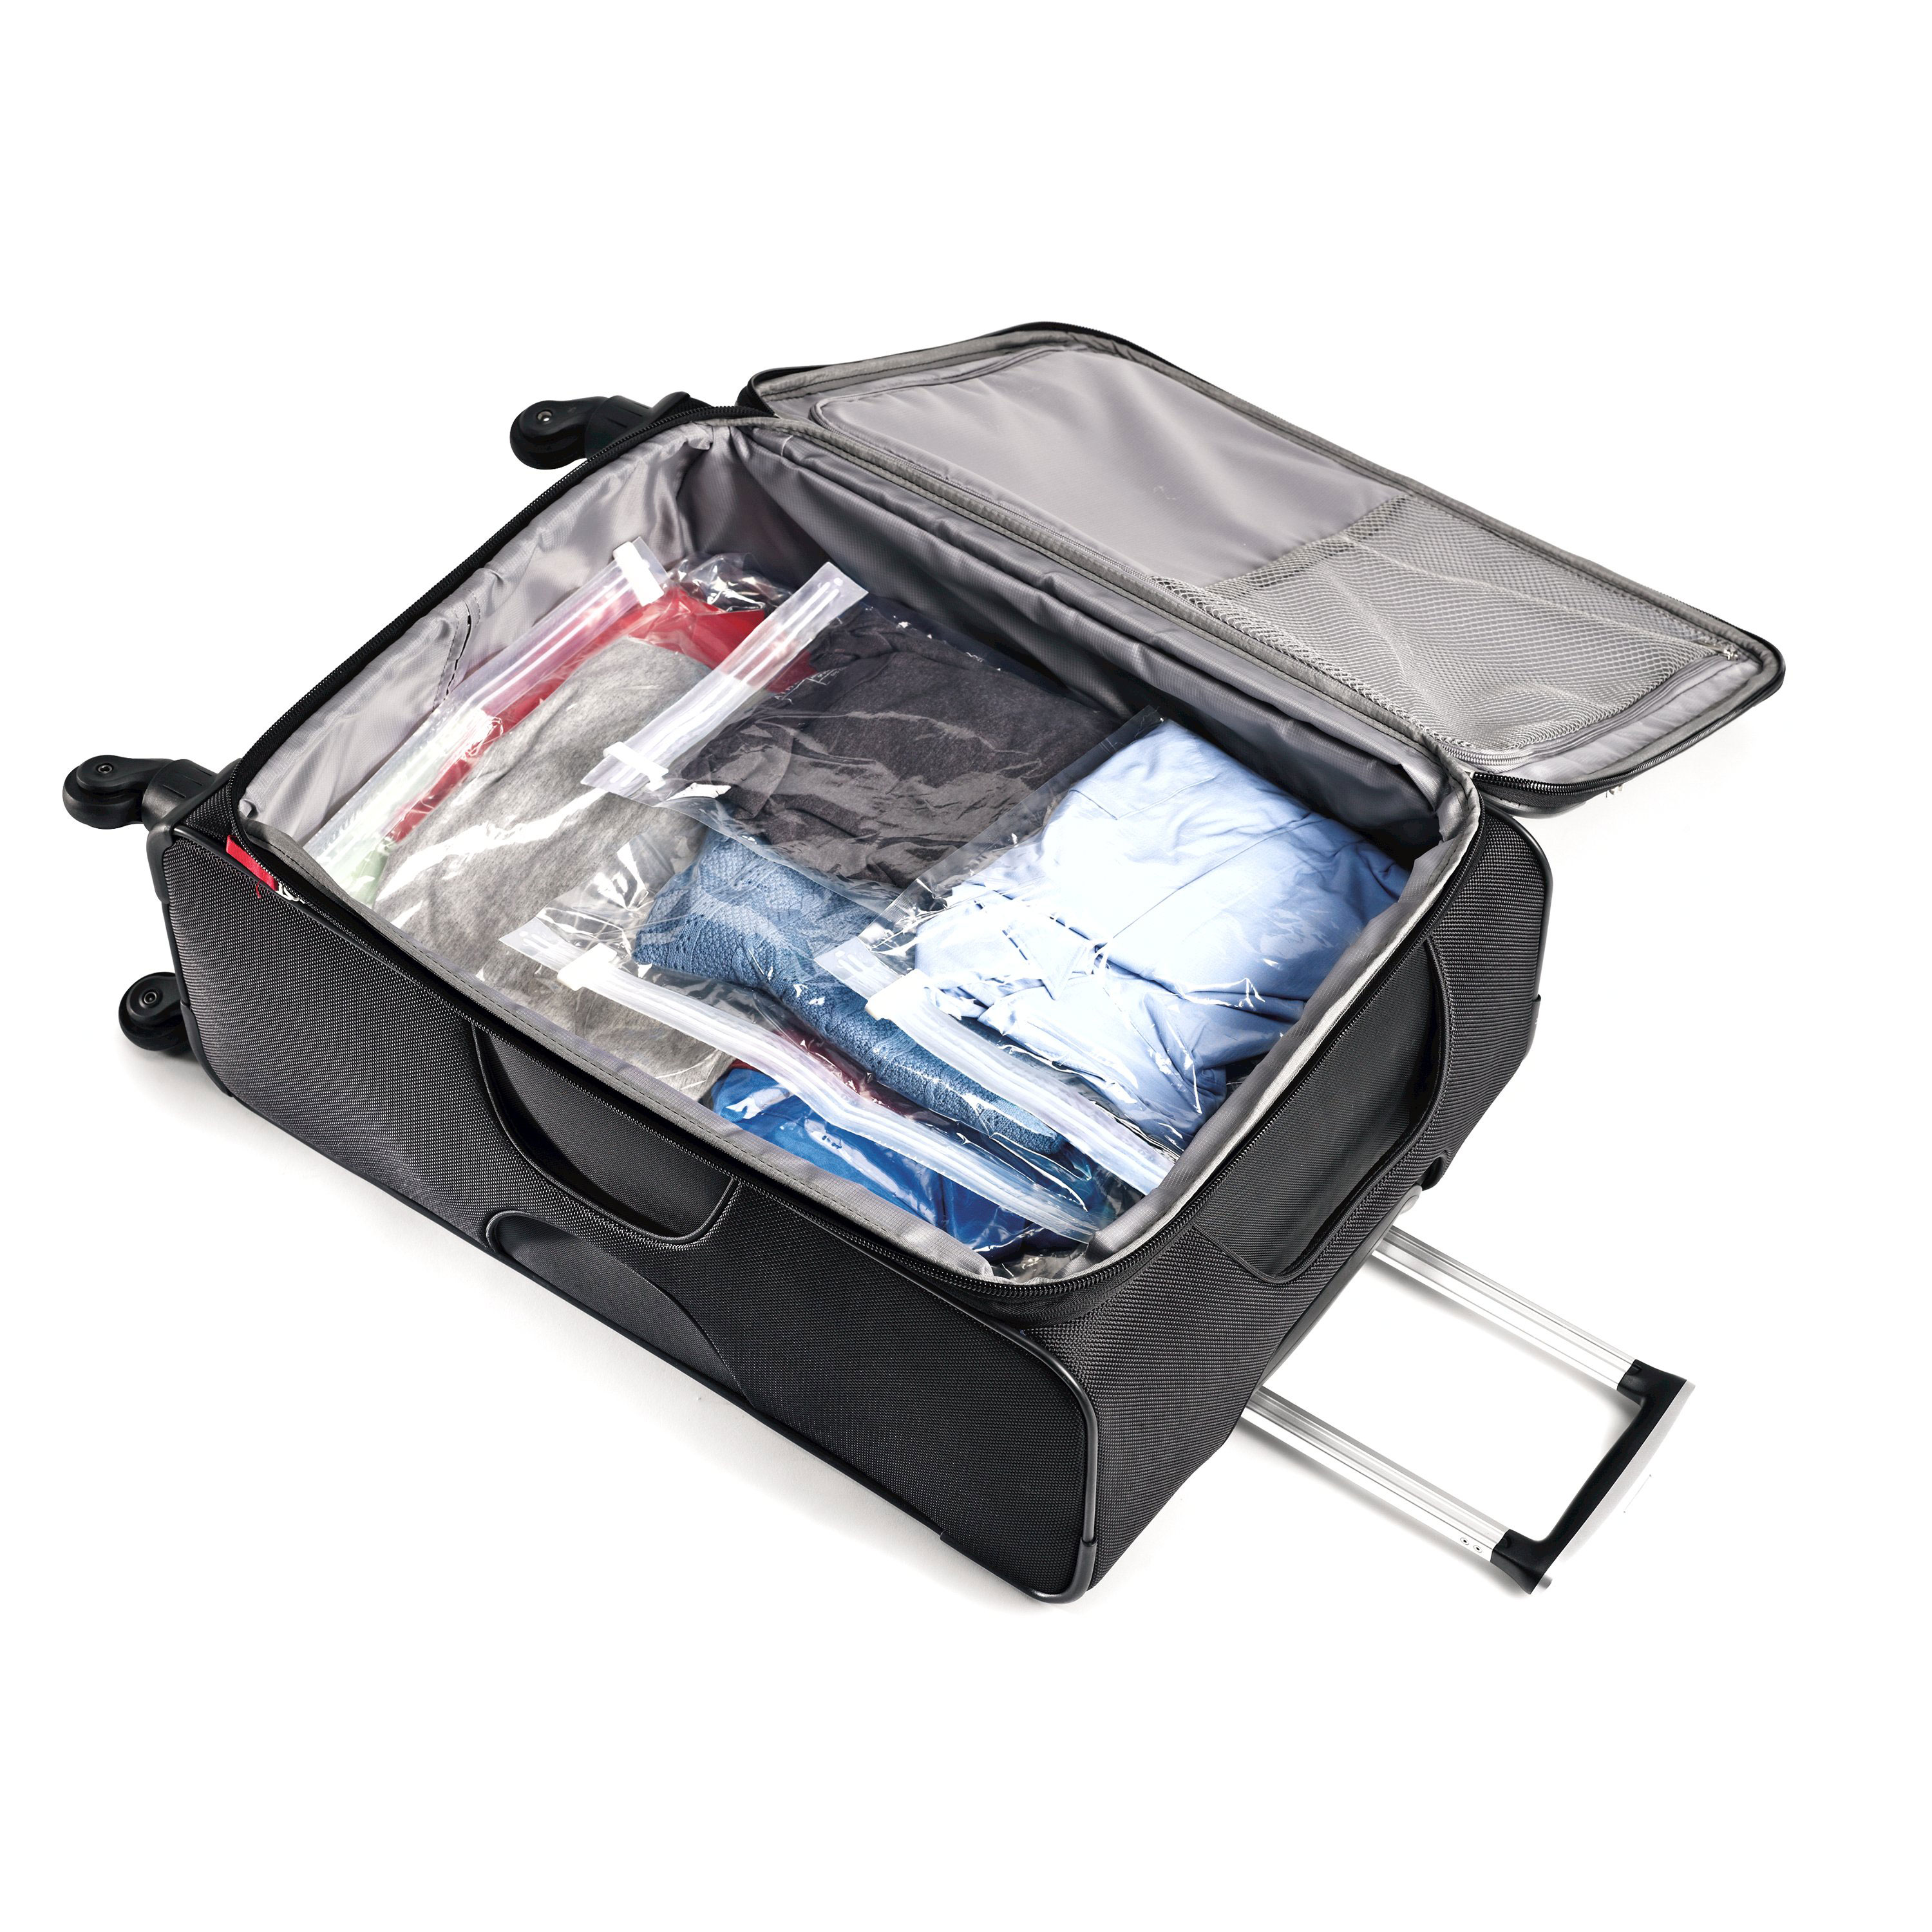 Packing Bags for Travel 12 Pcs Space Saver Compression Bags